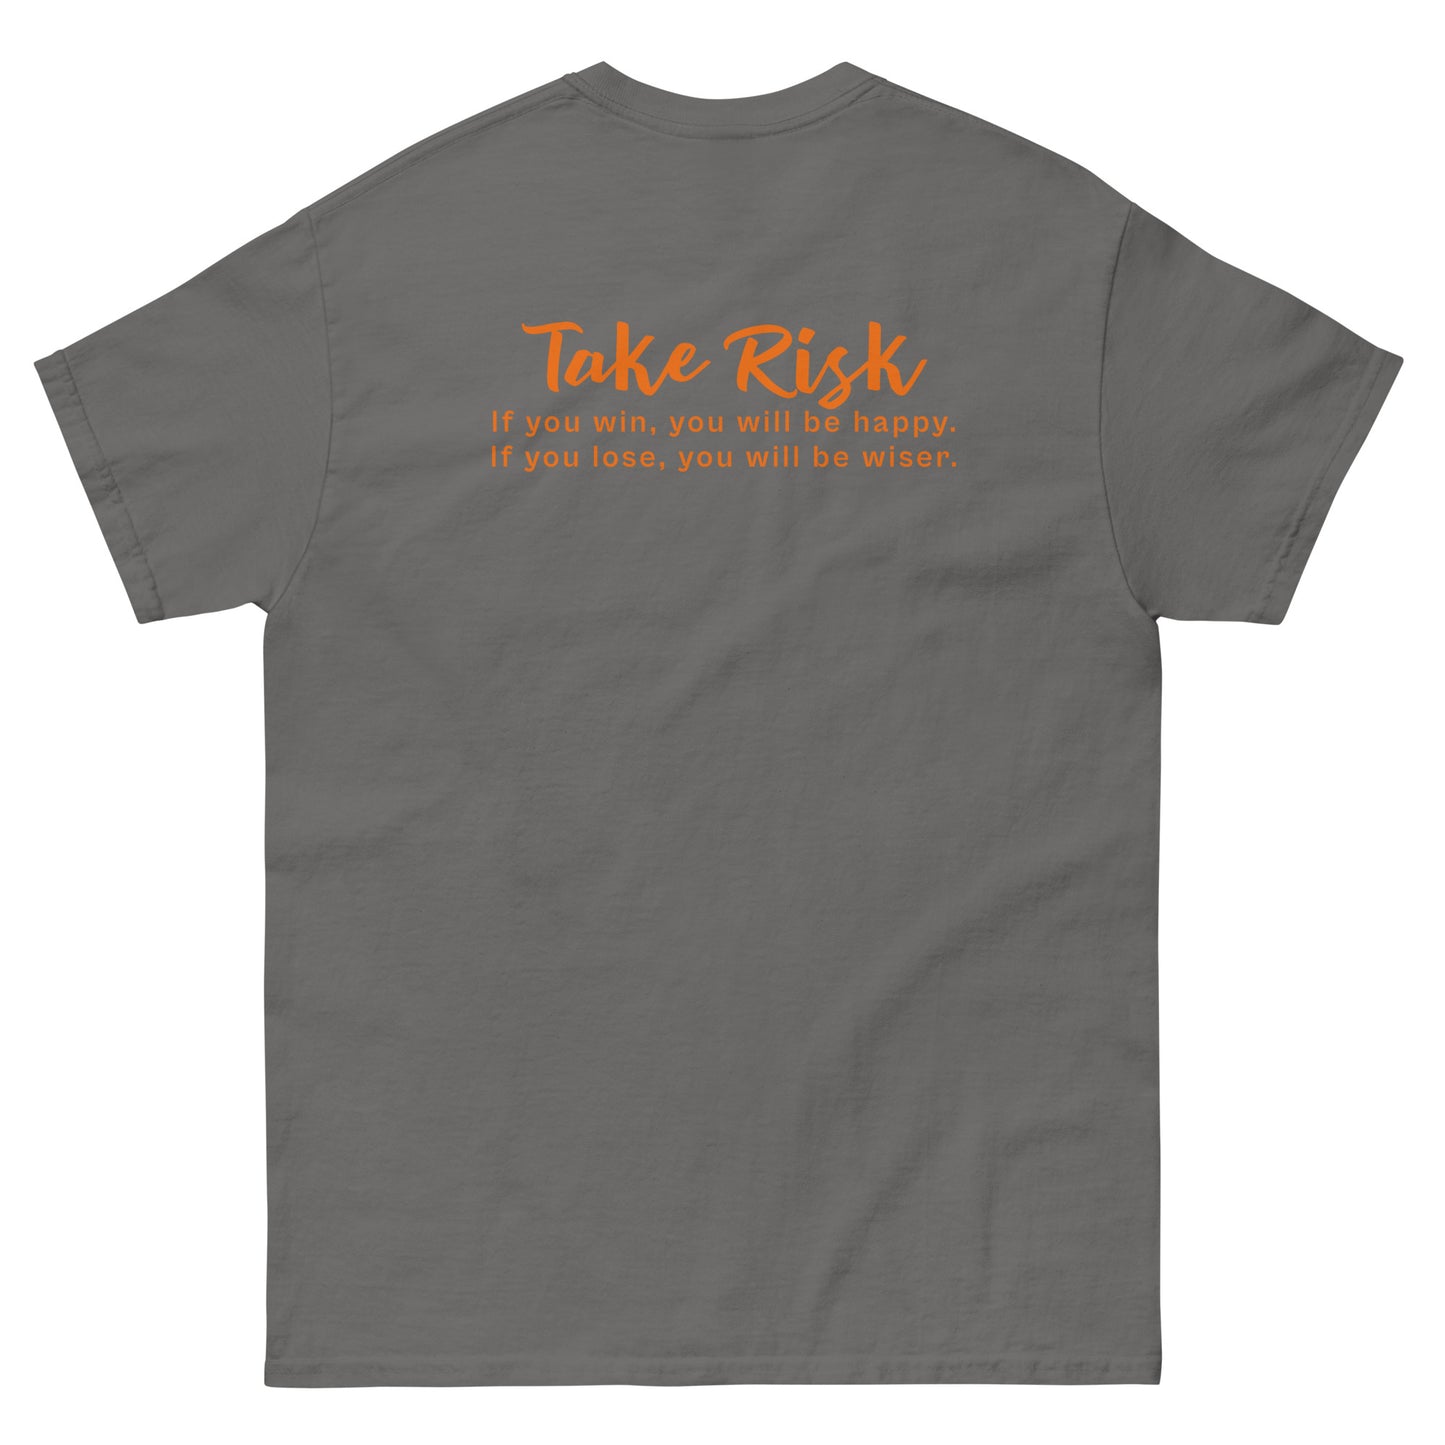 Dark Gray High Quality Tee - Front Design with "Take Risk, if you win you will be happy, if you lose you will be wiser." print and an UFO print on left chest - Back Design with a Phrase "Take Risk, if you win you will be happy, if you lose you will be wiser." print